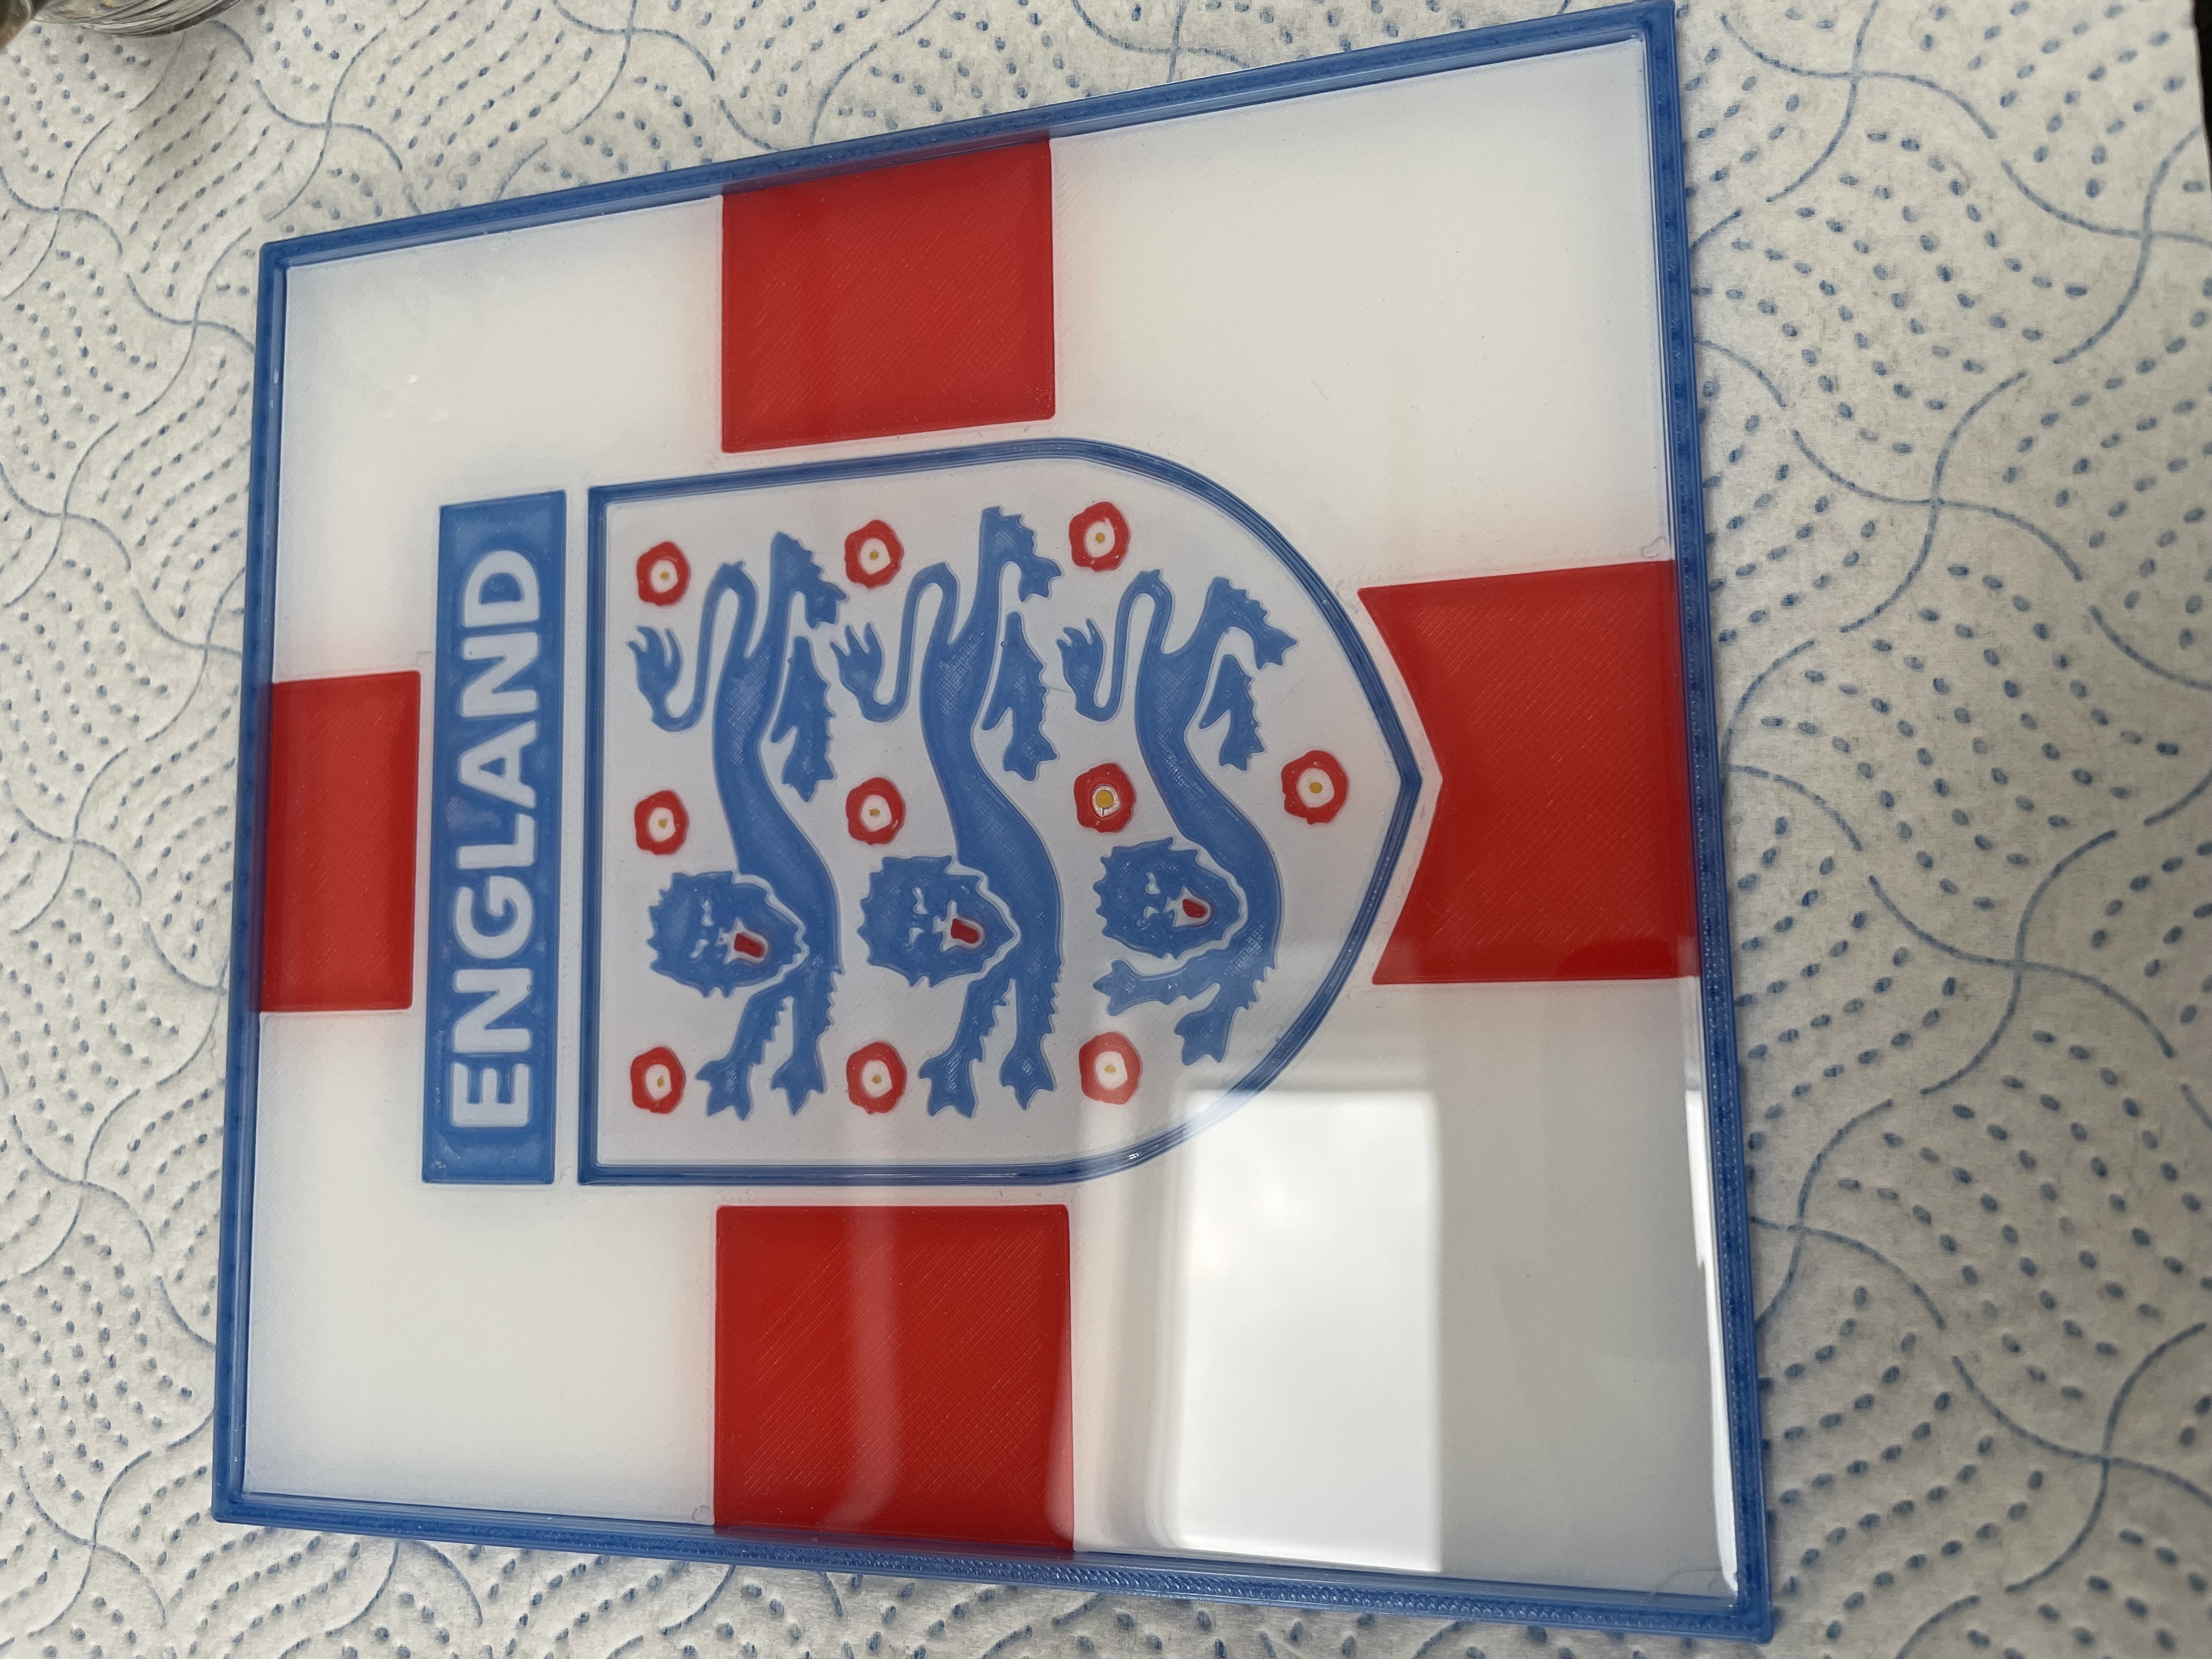 Football: Euro 2020 - England Badge and Flag (It's coming home) - MMU2S